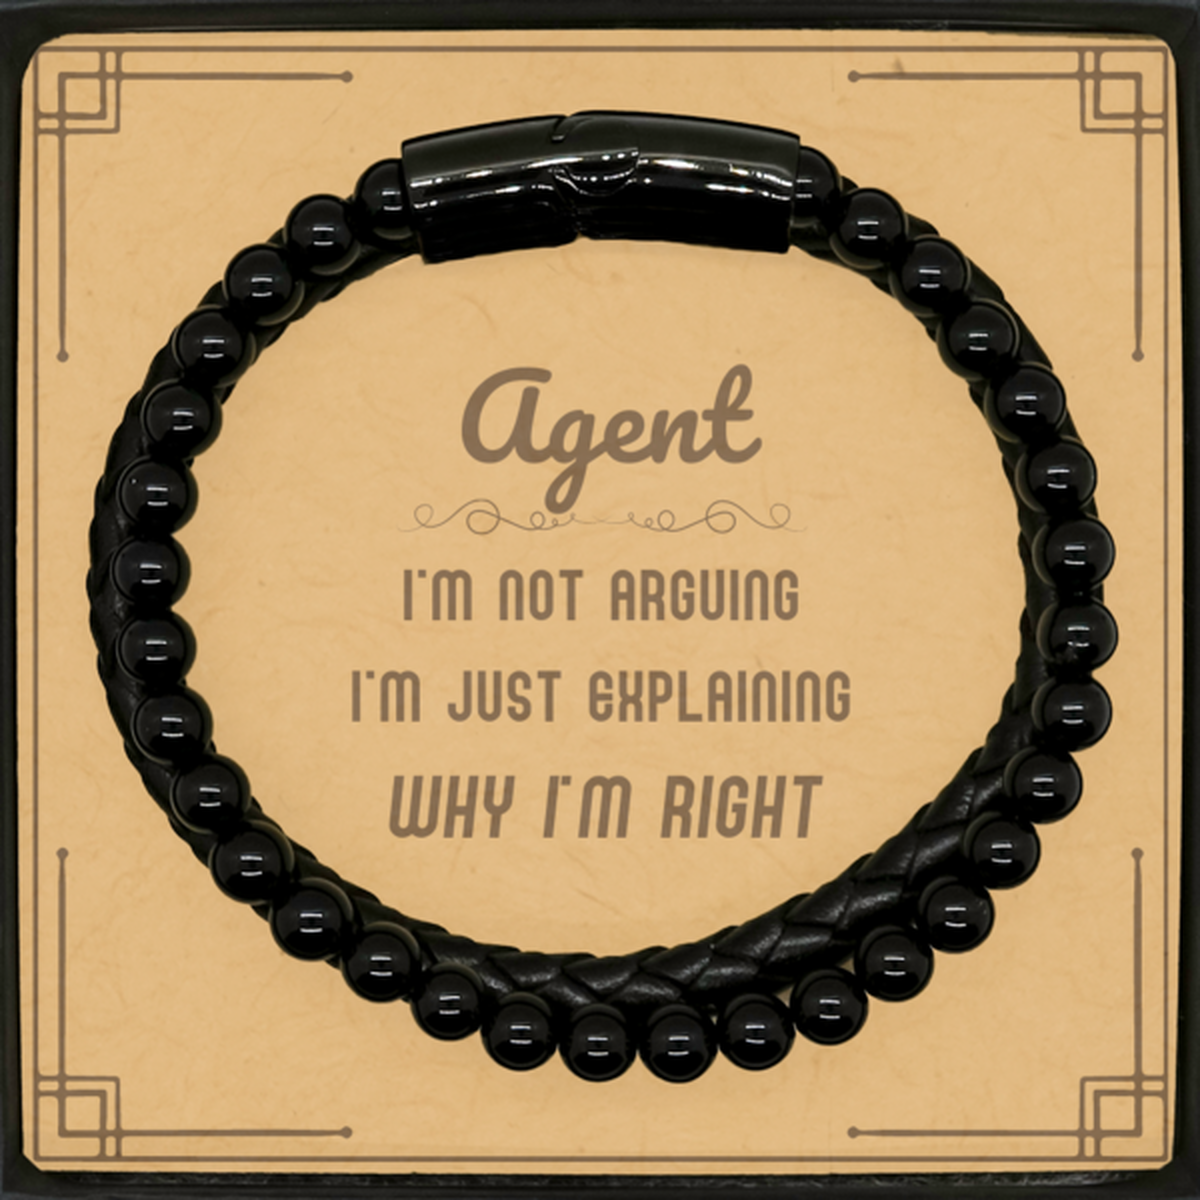 Agent I'm not Arguing. I'm Just Explaining Why I'm RIGHT Stone Leather Bracelets, Funny Saying Quote Agent Gifts For Agent Message Card Graduation Birthday Christmas Gifts for Men Women Coworker